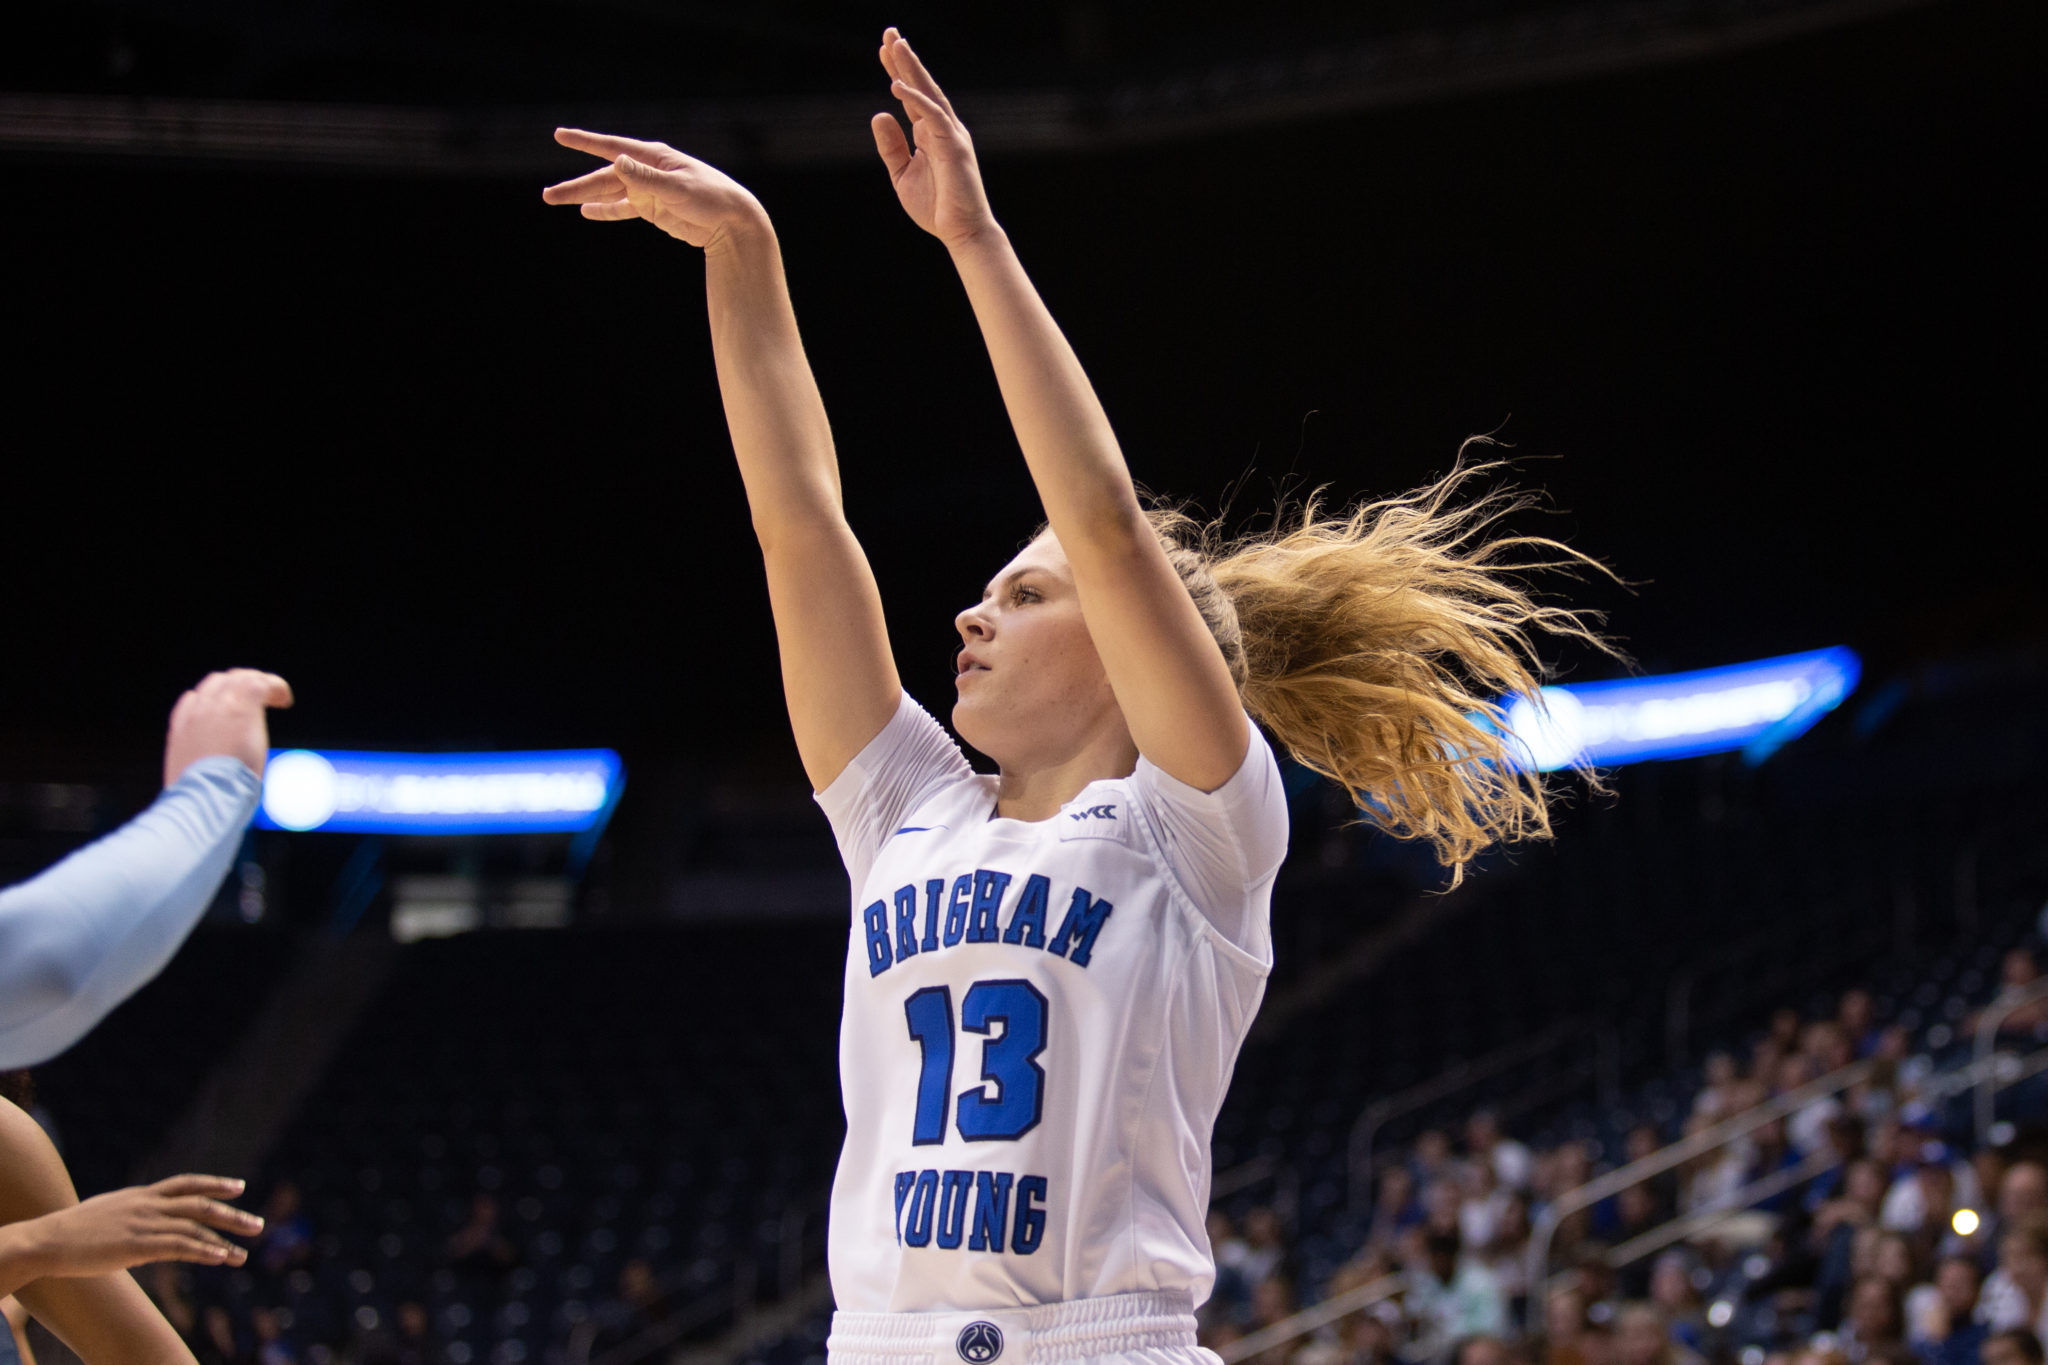 BYU women's basketball celebrates senior day with victory over LMU